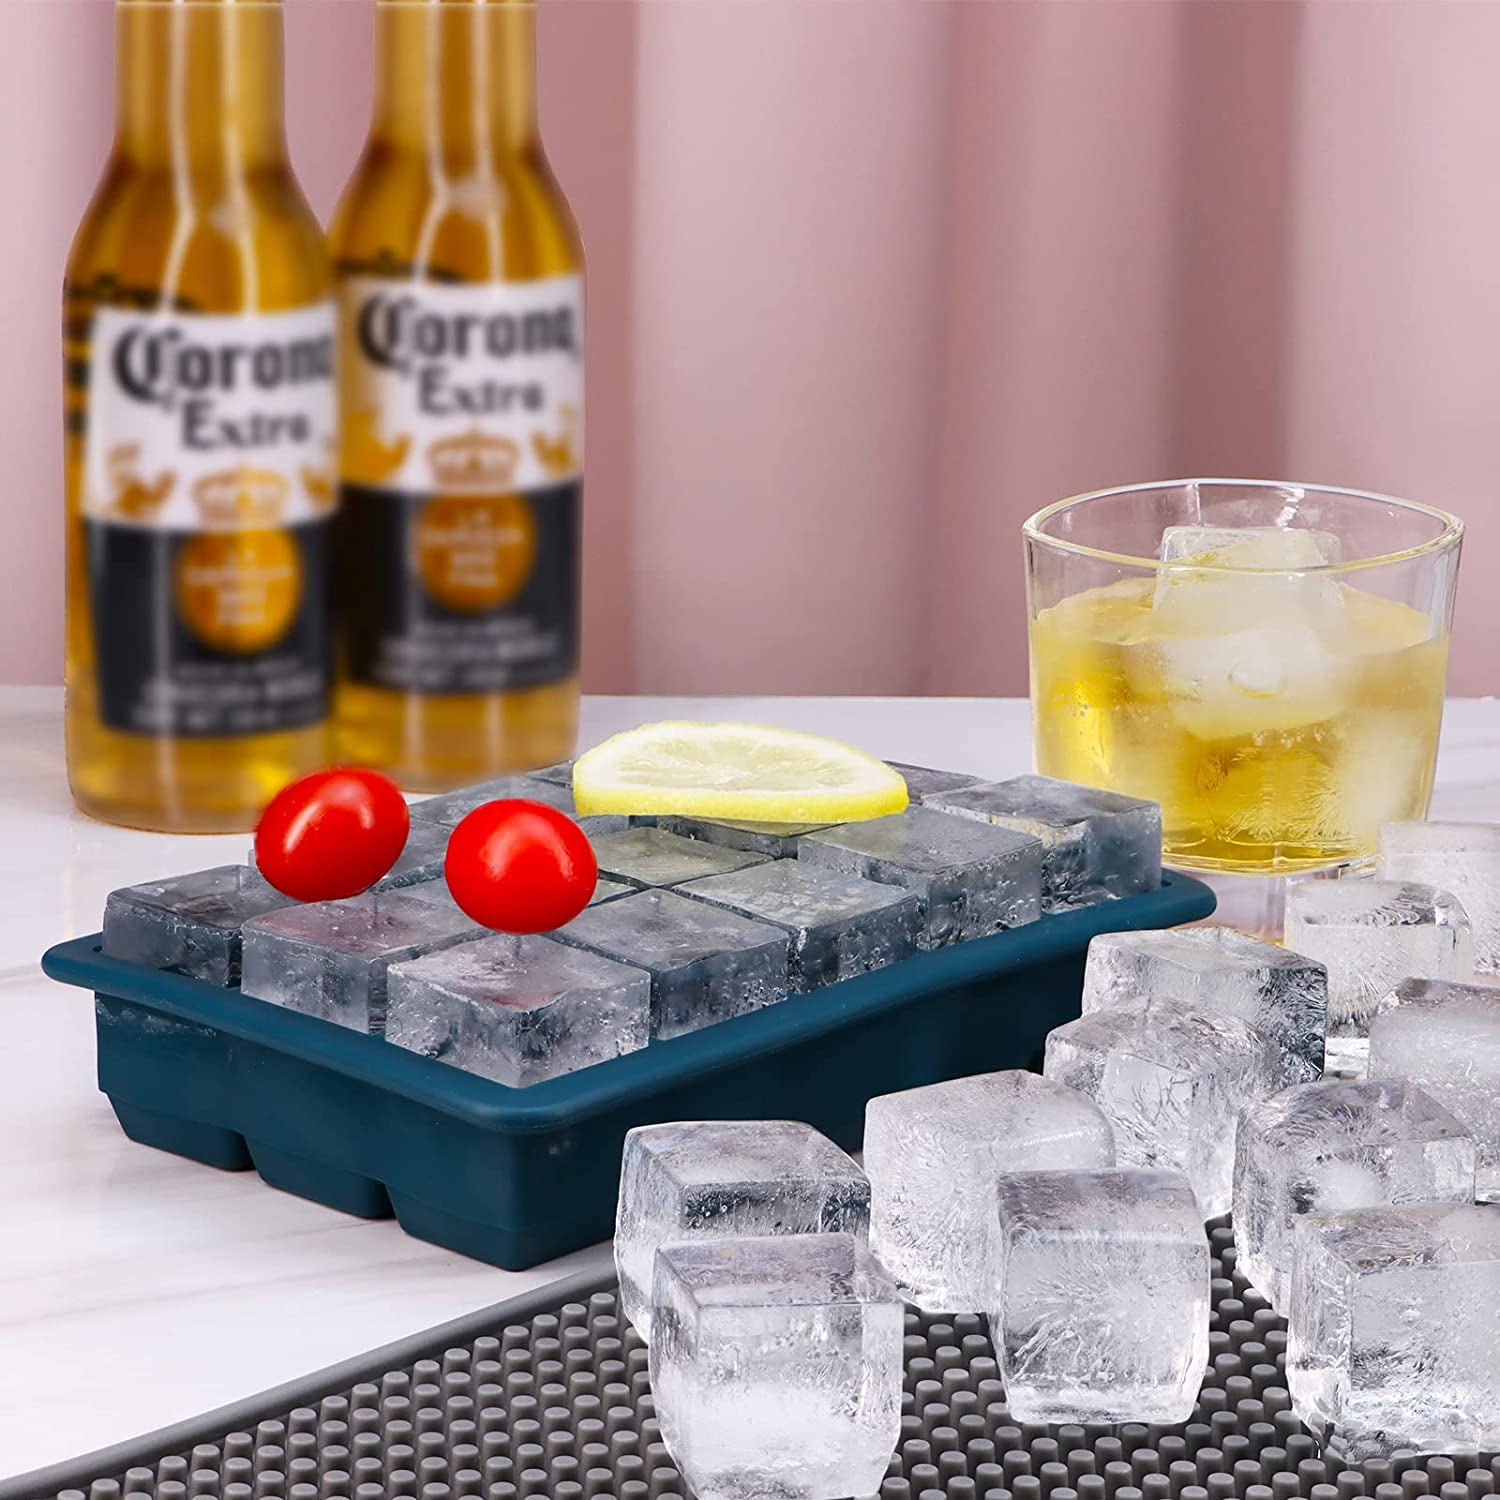 2x Flexible Silicone Ice Cube Tray 15 Square Ice Cube Maker